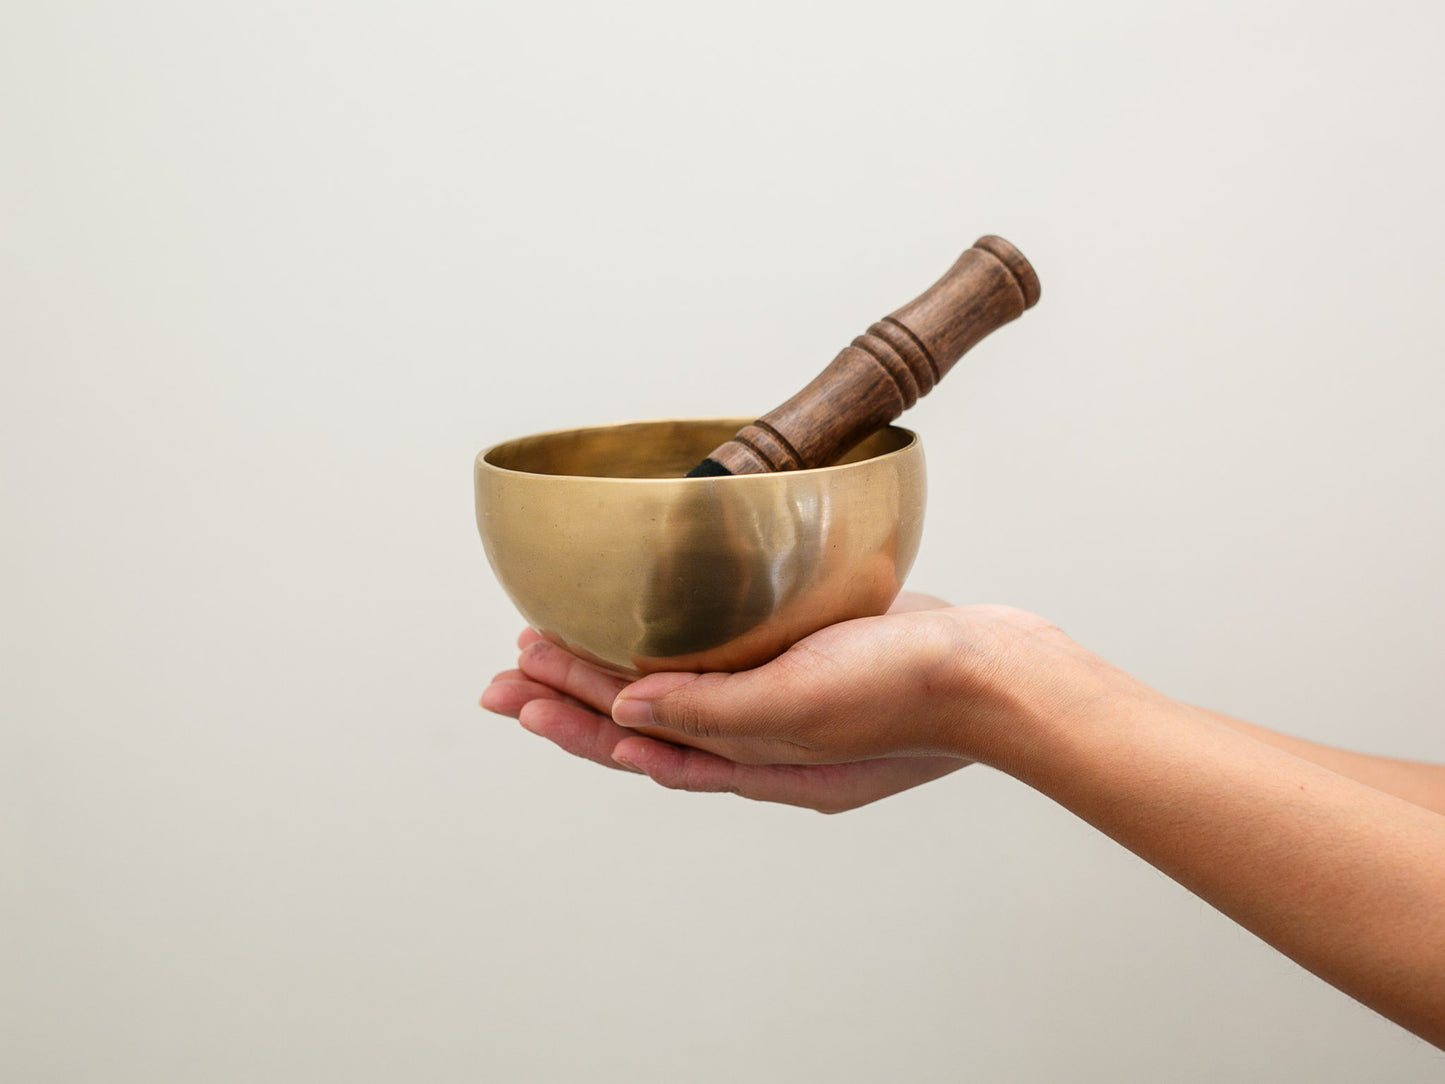 Small Contemporary Flow Singing Bowl - Base note G4 (392)